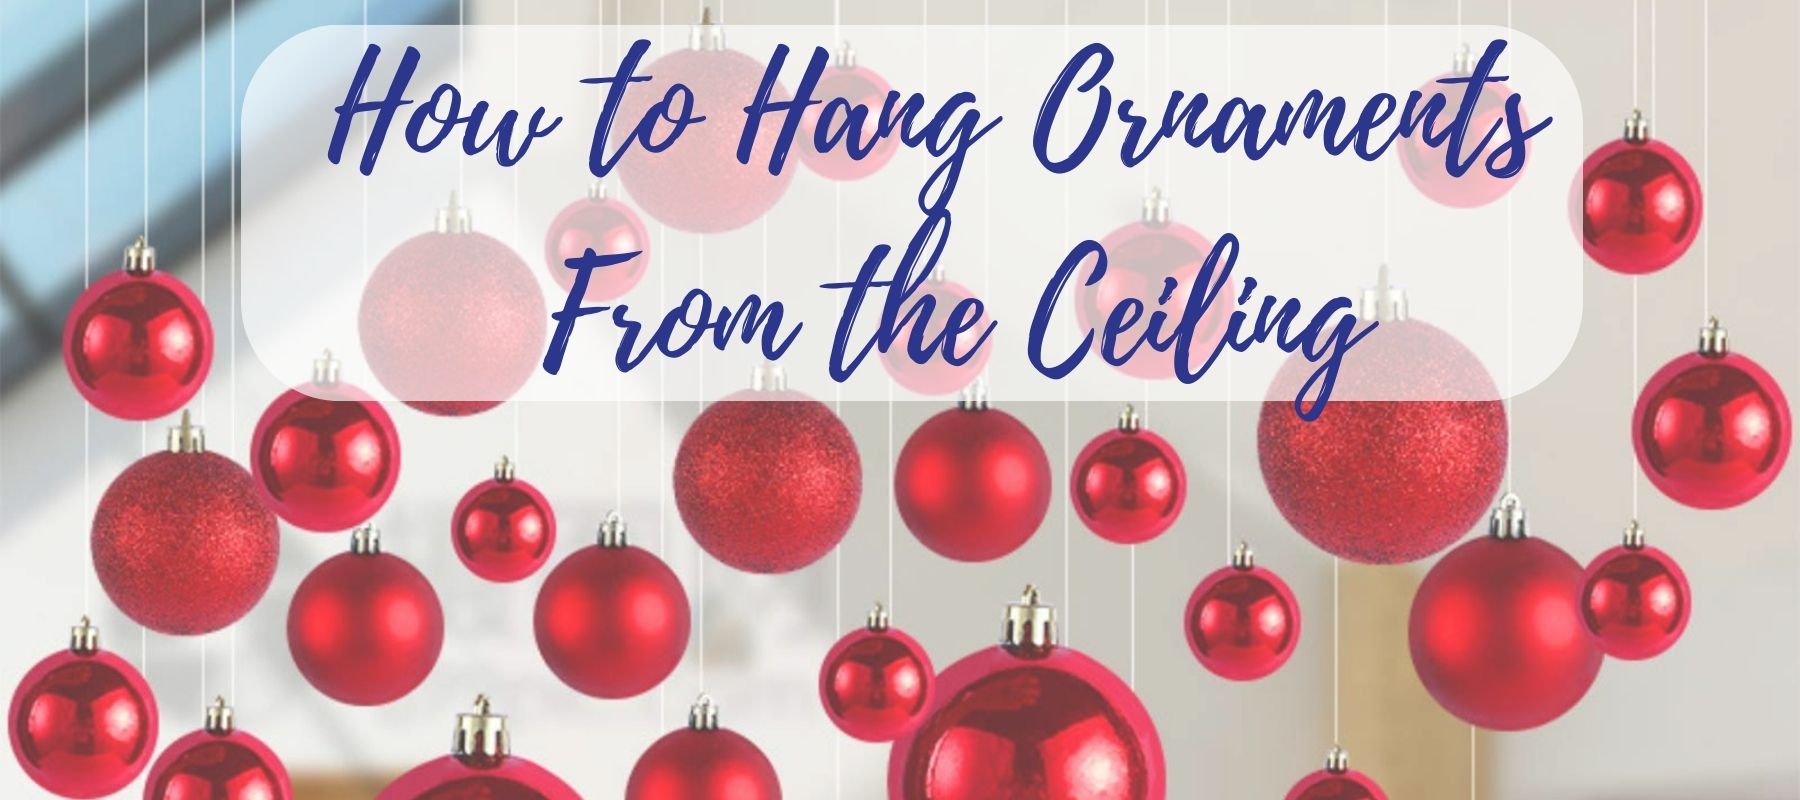 How to Hang Ornaments From the Ceiling - Unifury